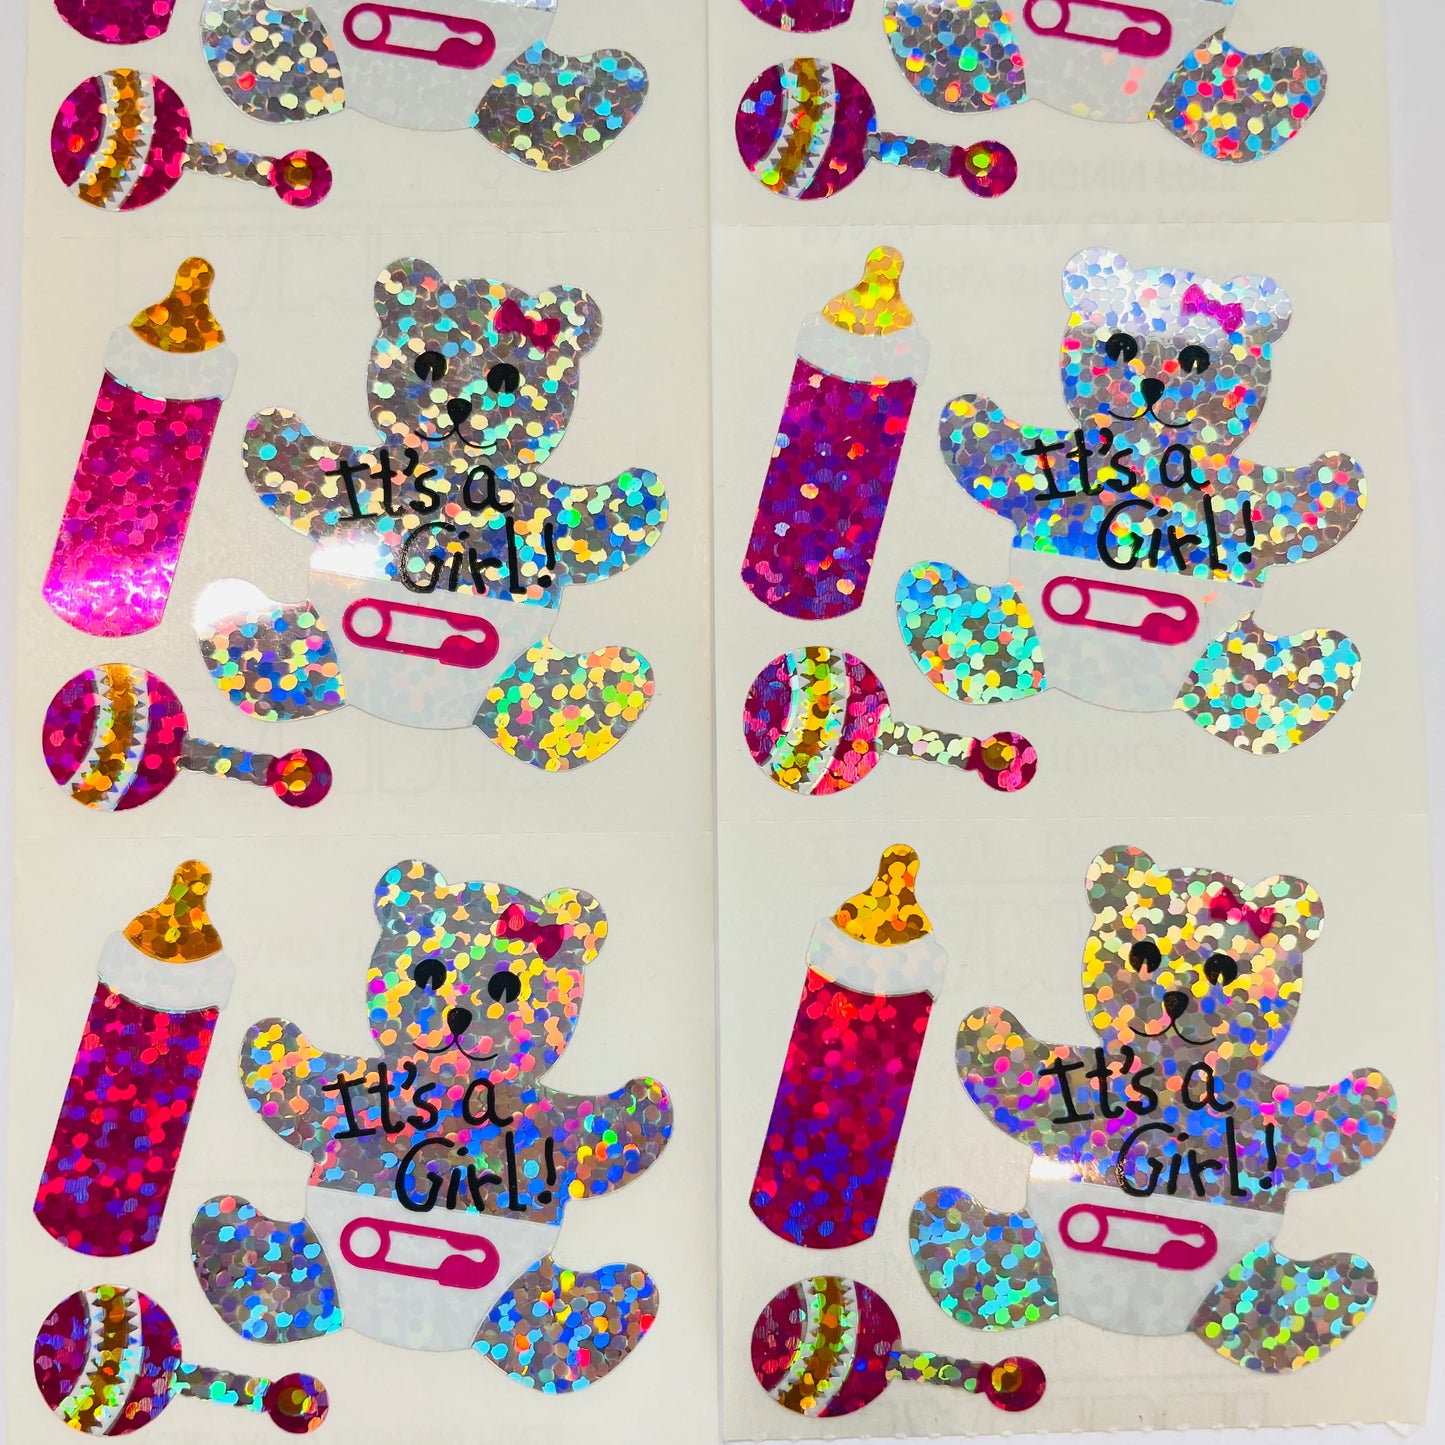 HAMBLY: It's a girl! glitter stickers